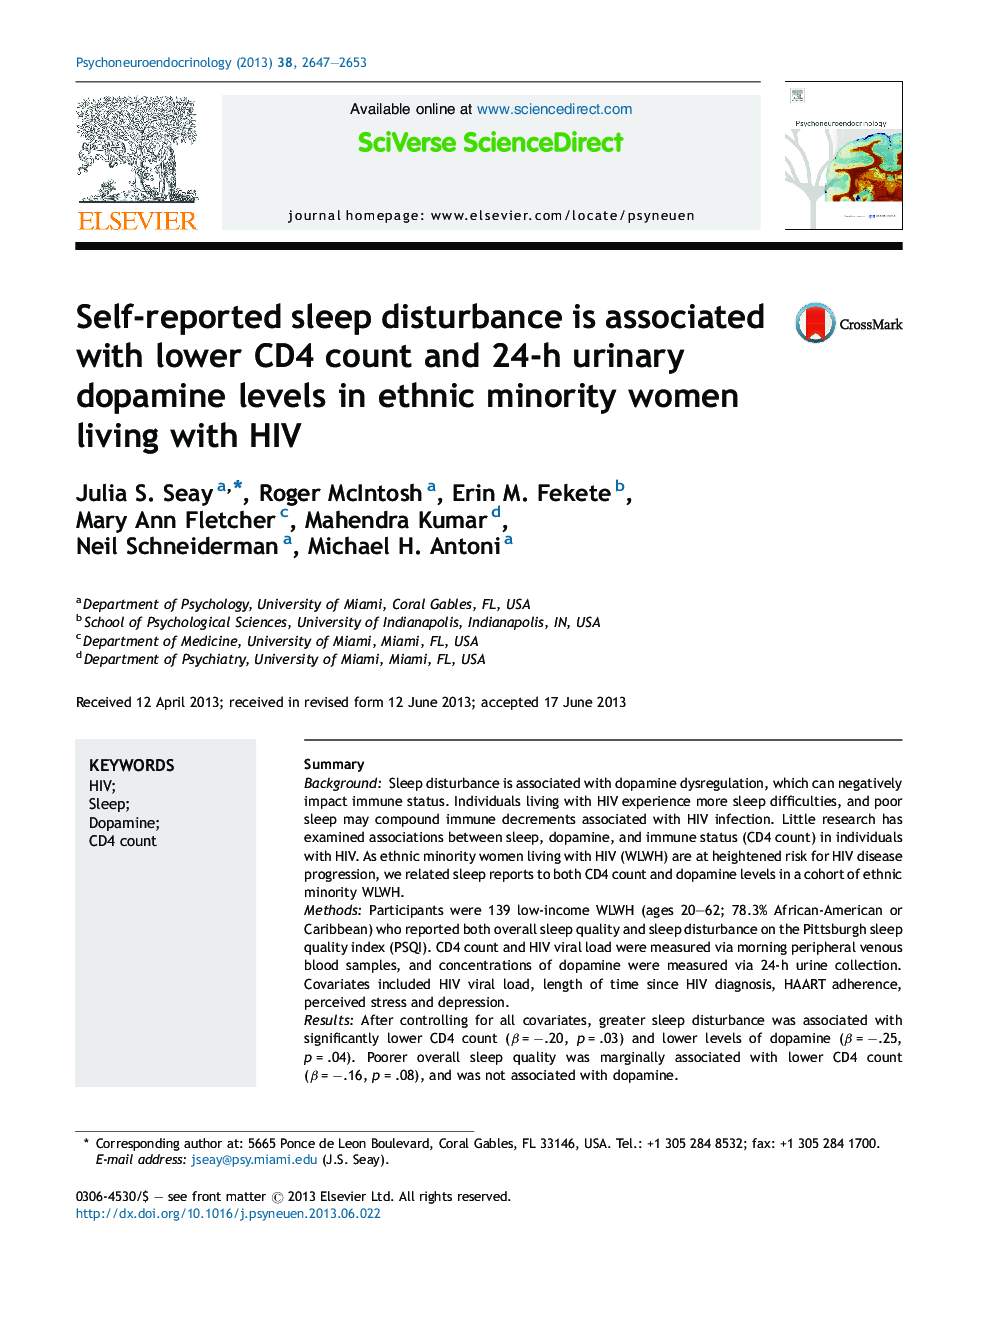 Self-reported sleep disturbance is associated with lower CD4 count and 24-h urinary dopamine levels in ethnic minority women living with HIV